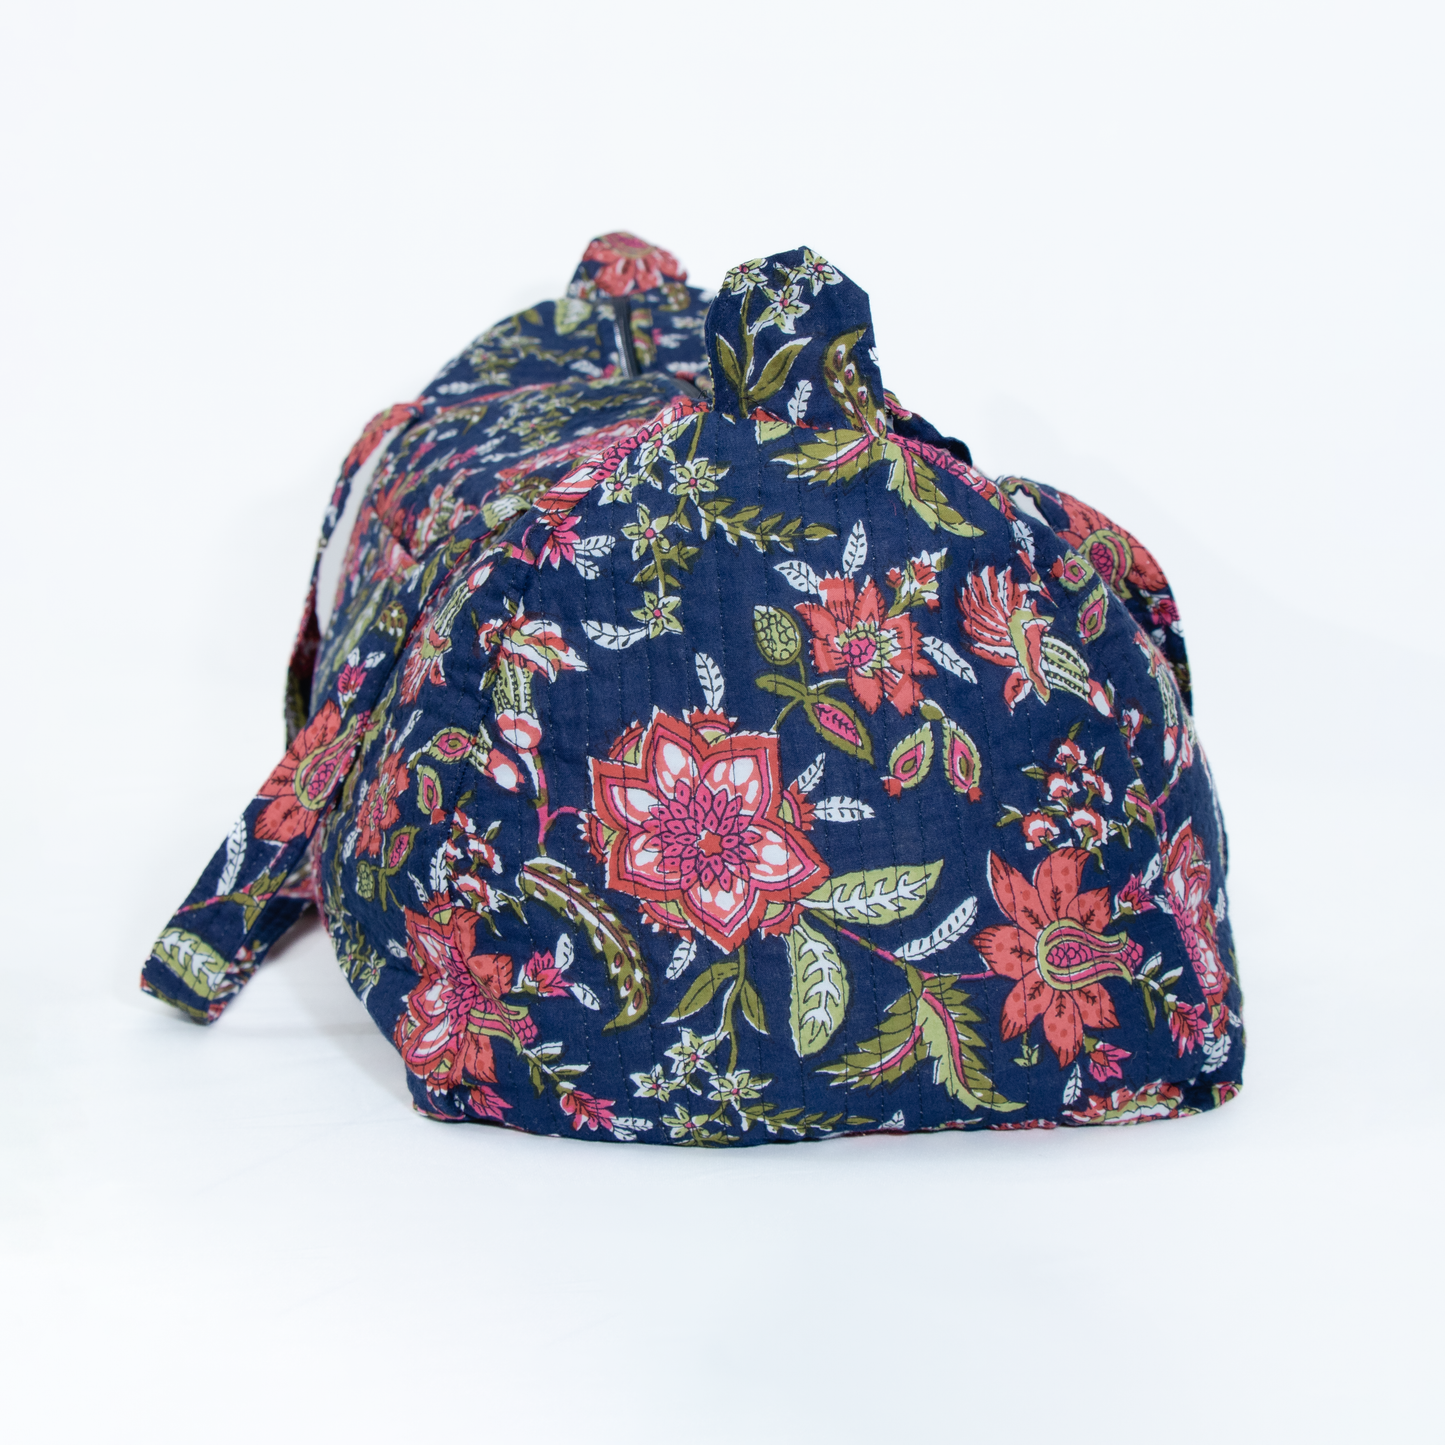 Navy Floral Duffle Bag